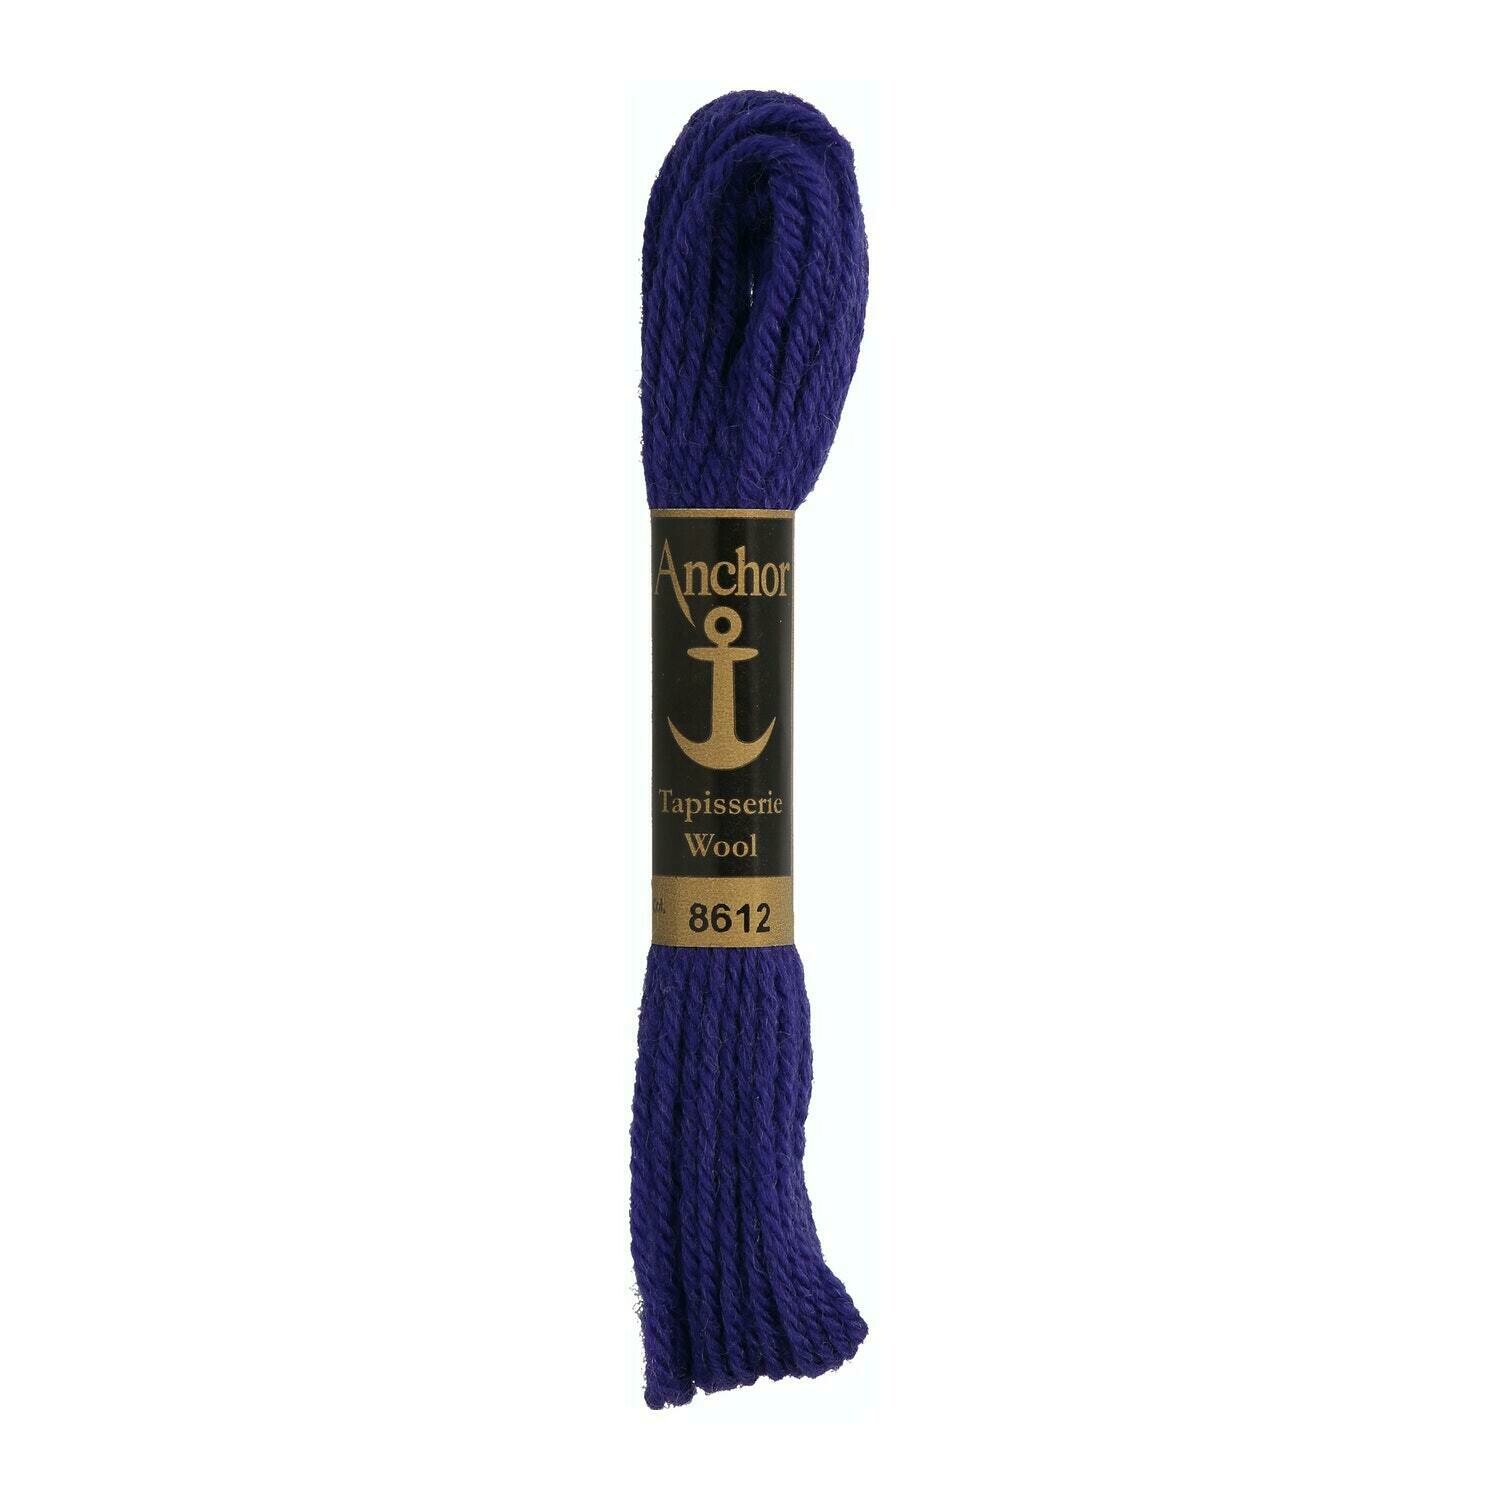 Anchor Tapisserie Wool #08612